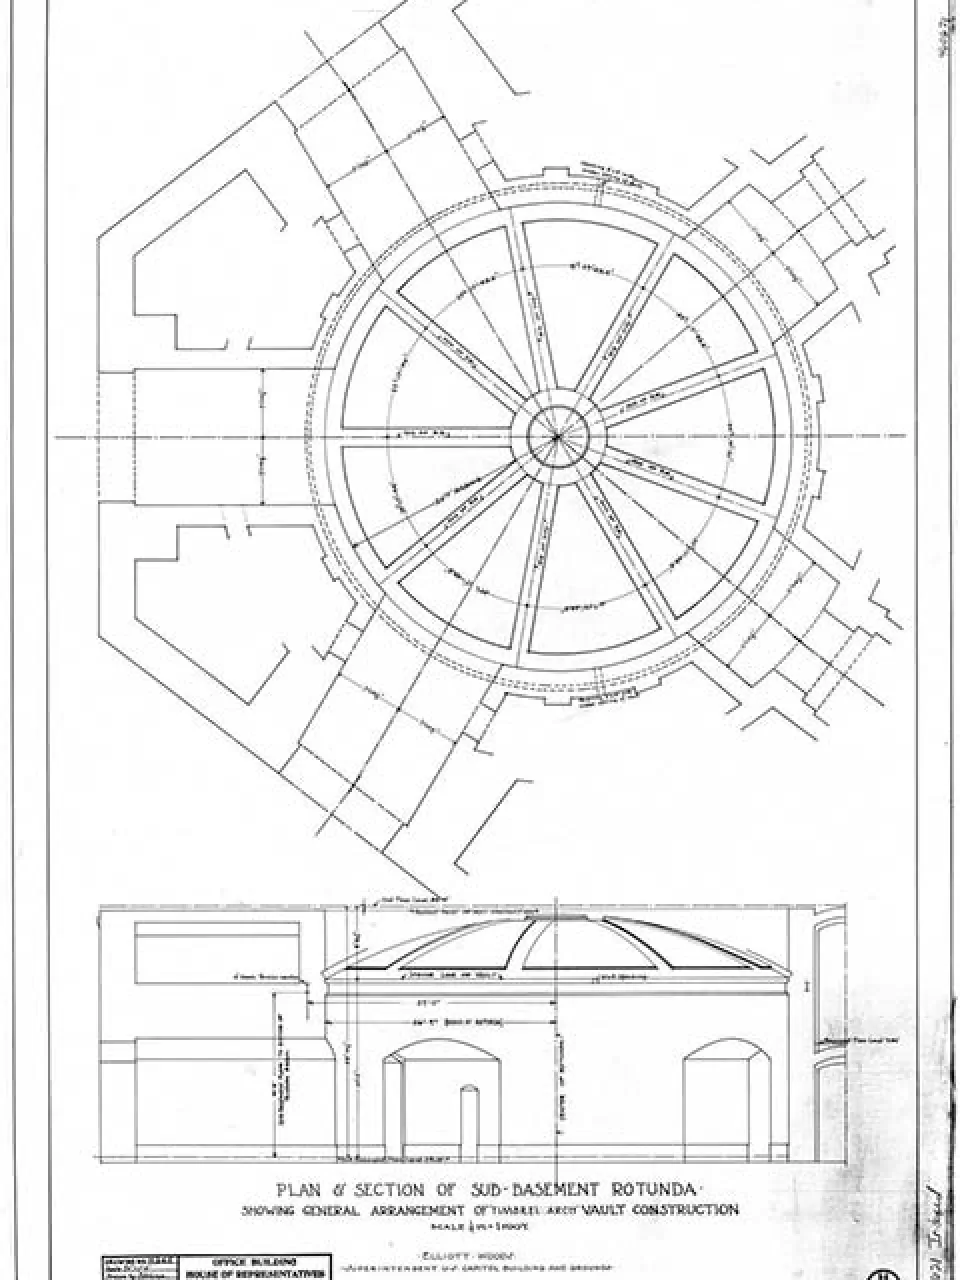 July 1905 section drawing showing the general arrangement of the “timbrel arch” vault construction, which has been preserved in the AOC’s archival collection.